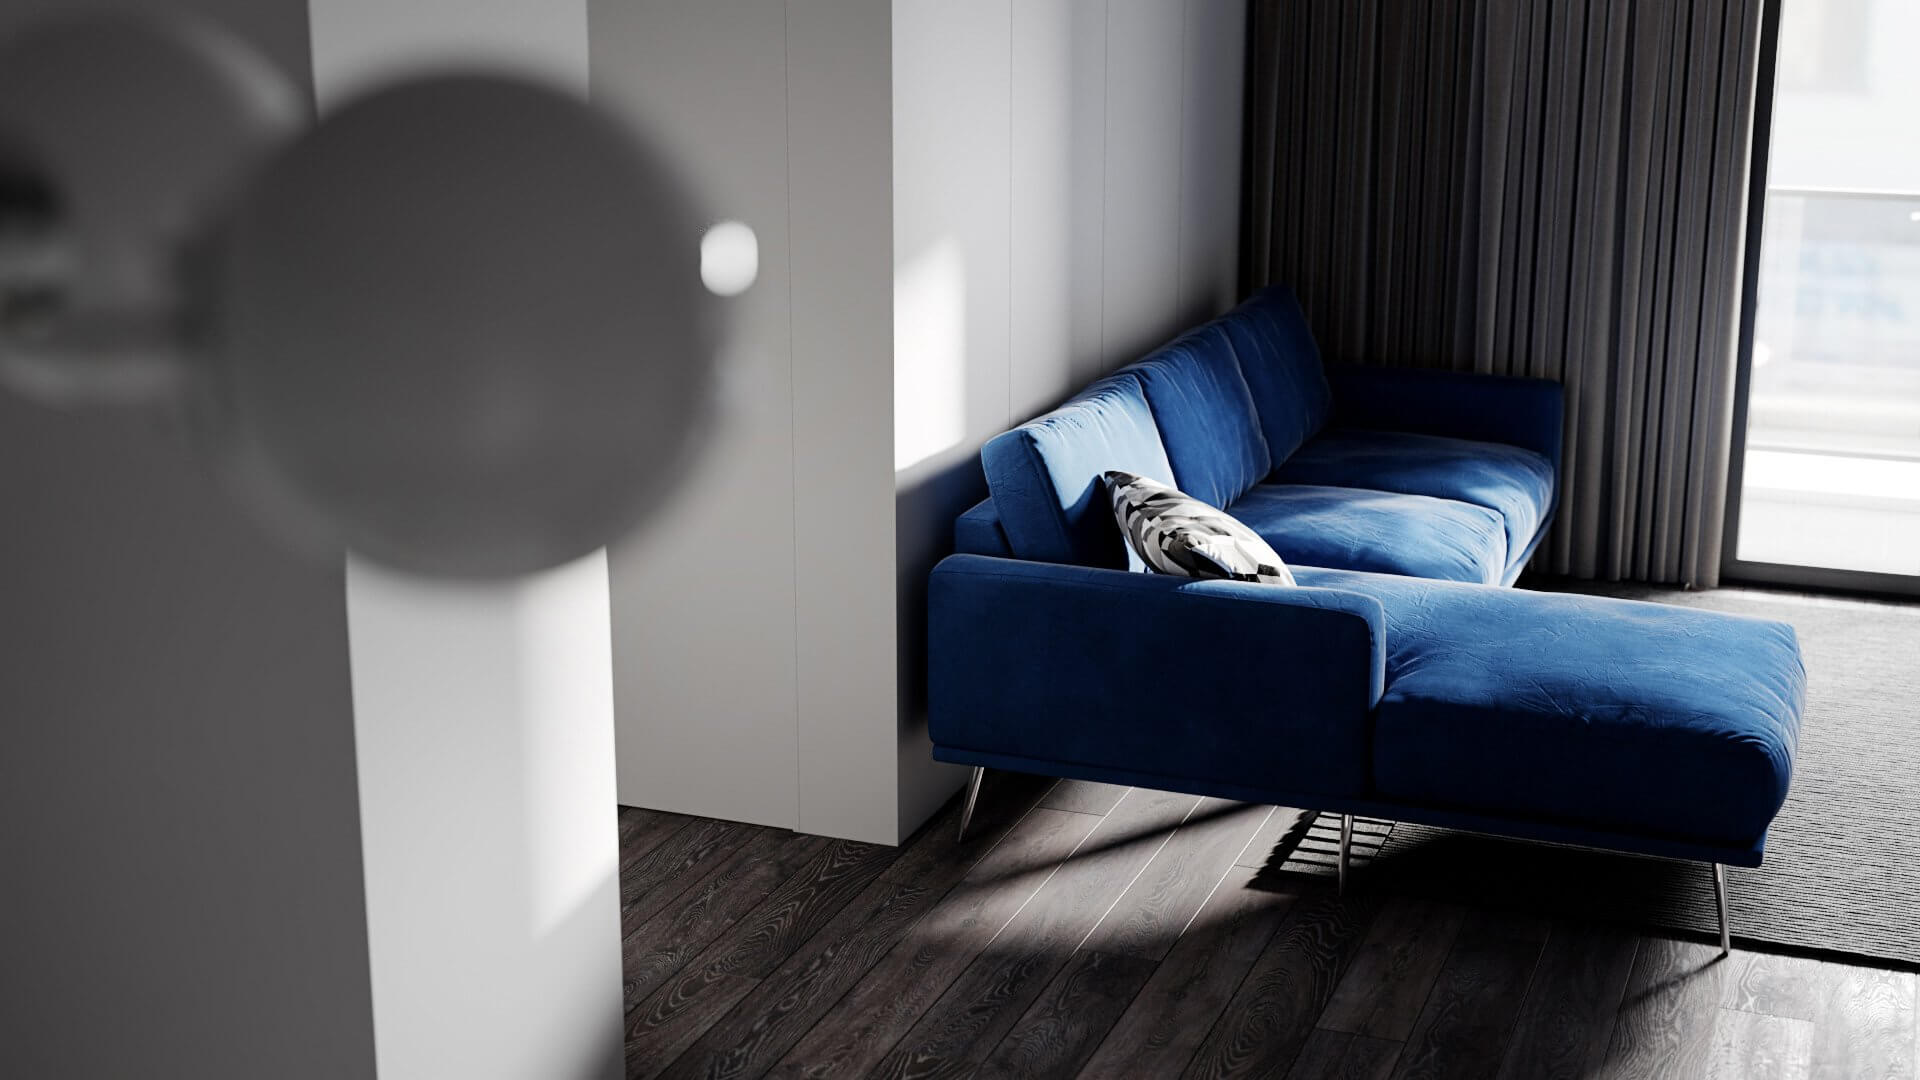 Classic and clean apartment living room couch blue velvet - cgi visualization